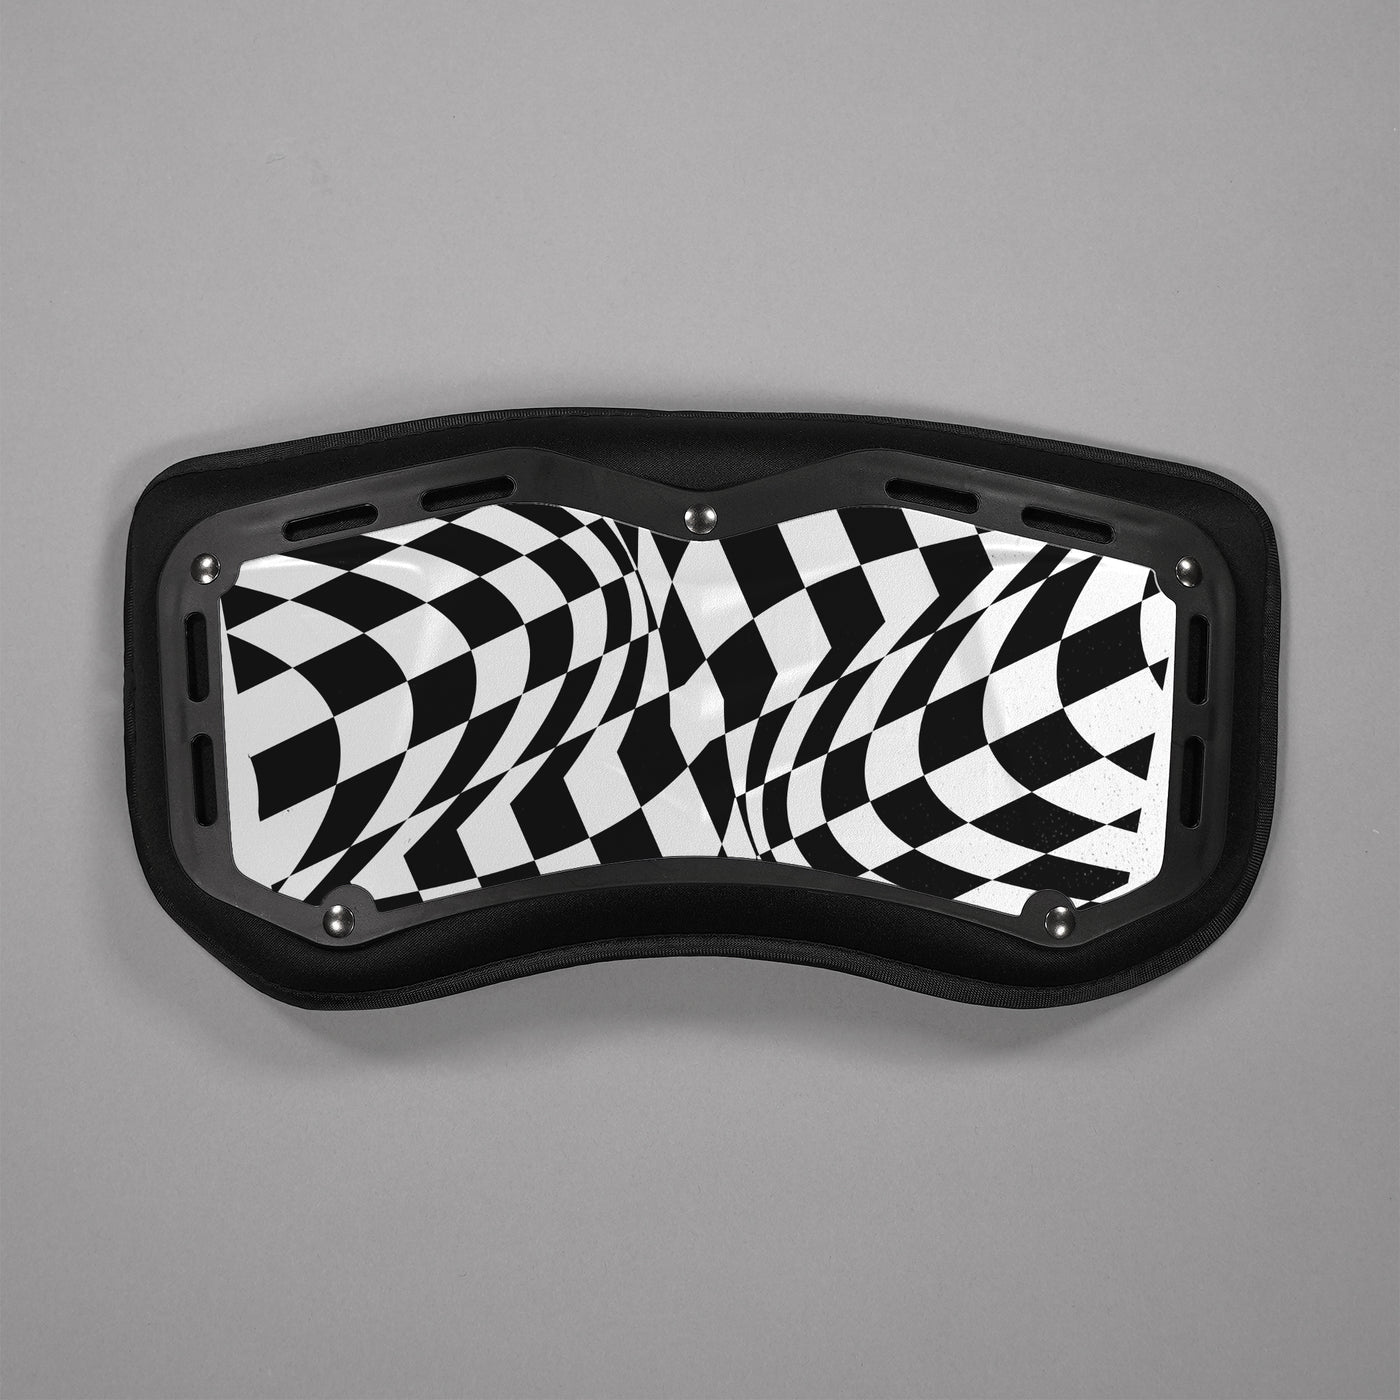 Warped Checkered Sticker for Back Plate